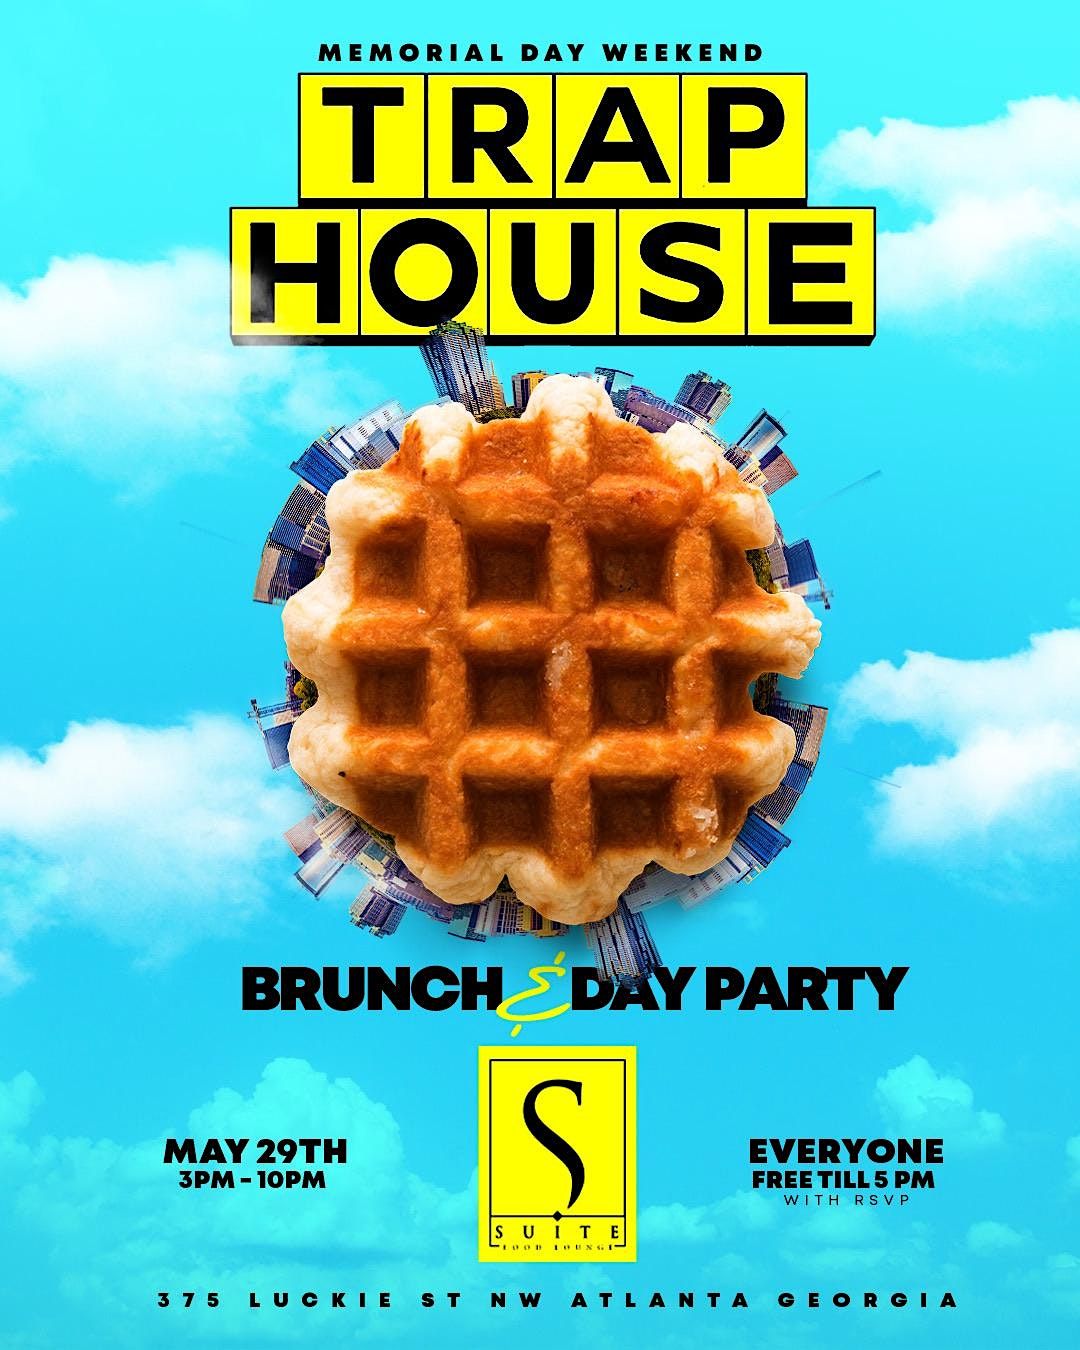 TRAP HOUSE BRUNCH + DAY PARTY